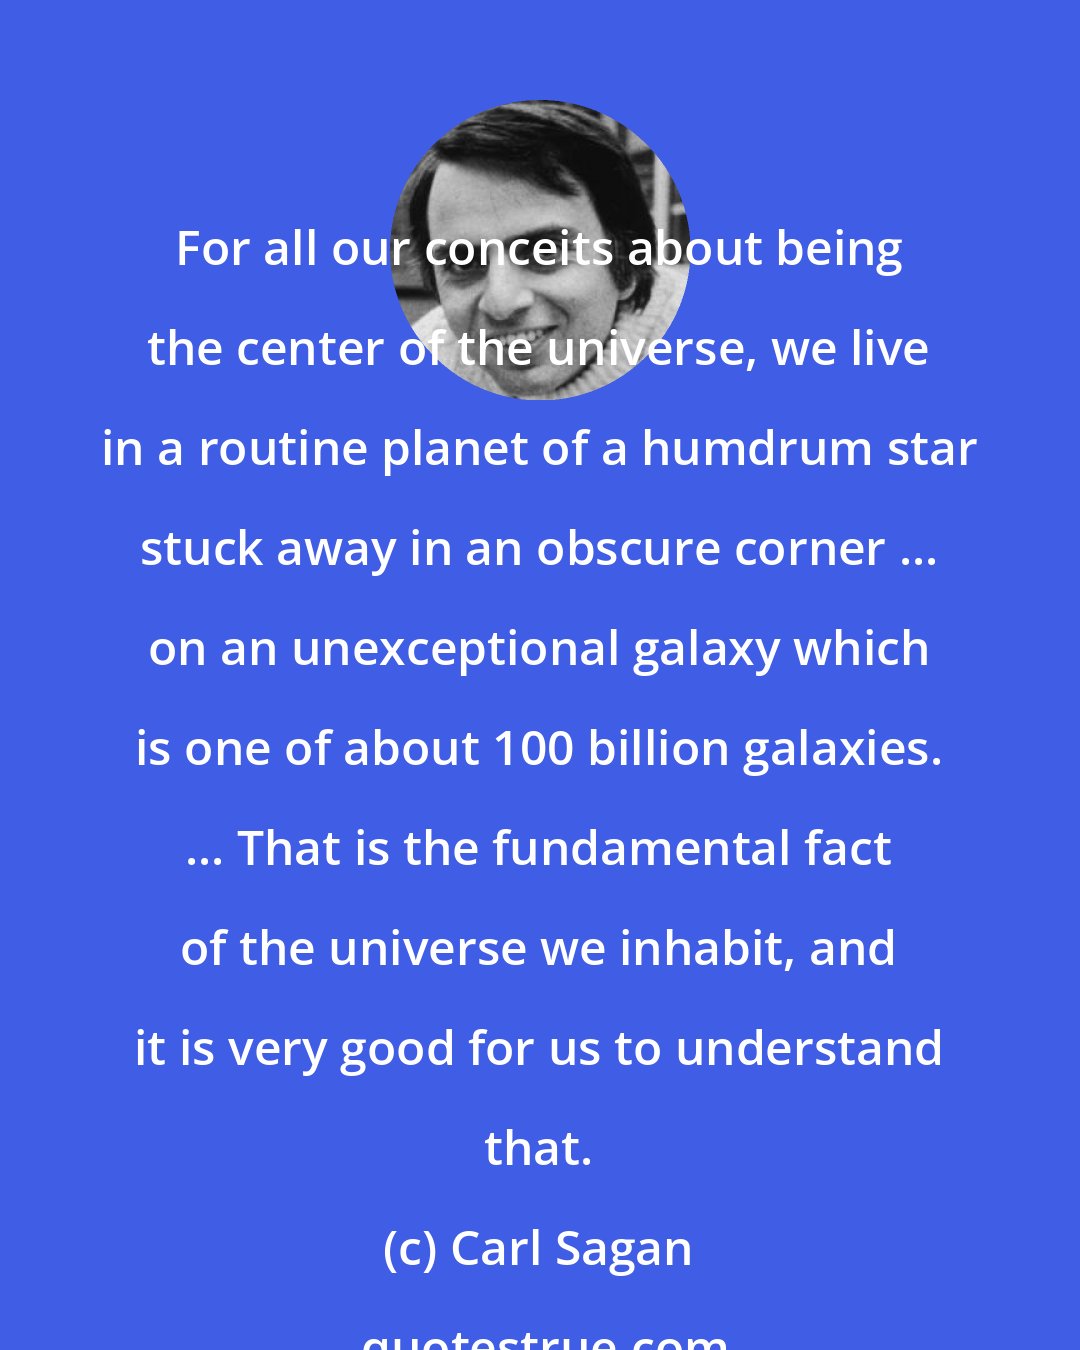 Carl Sagan: For all our conceits about being the center of the universe, we live in a routine planet of a humdrum star stuck away in an obscure corner ... on an unexceptional galaxy which is one of about 100 billion galaxies. ... That is the fundamental fact of the universe we inhabit, and it is very good for us to understand that.